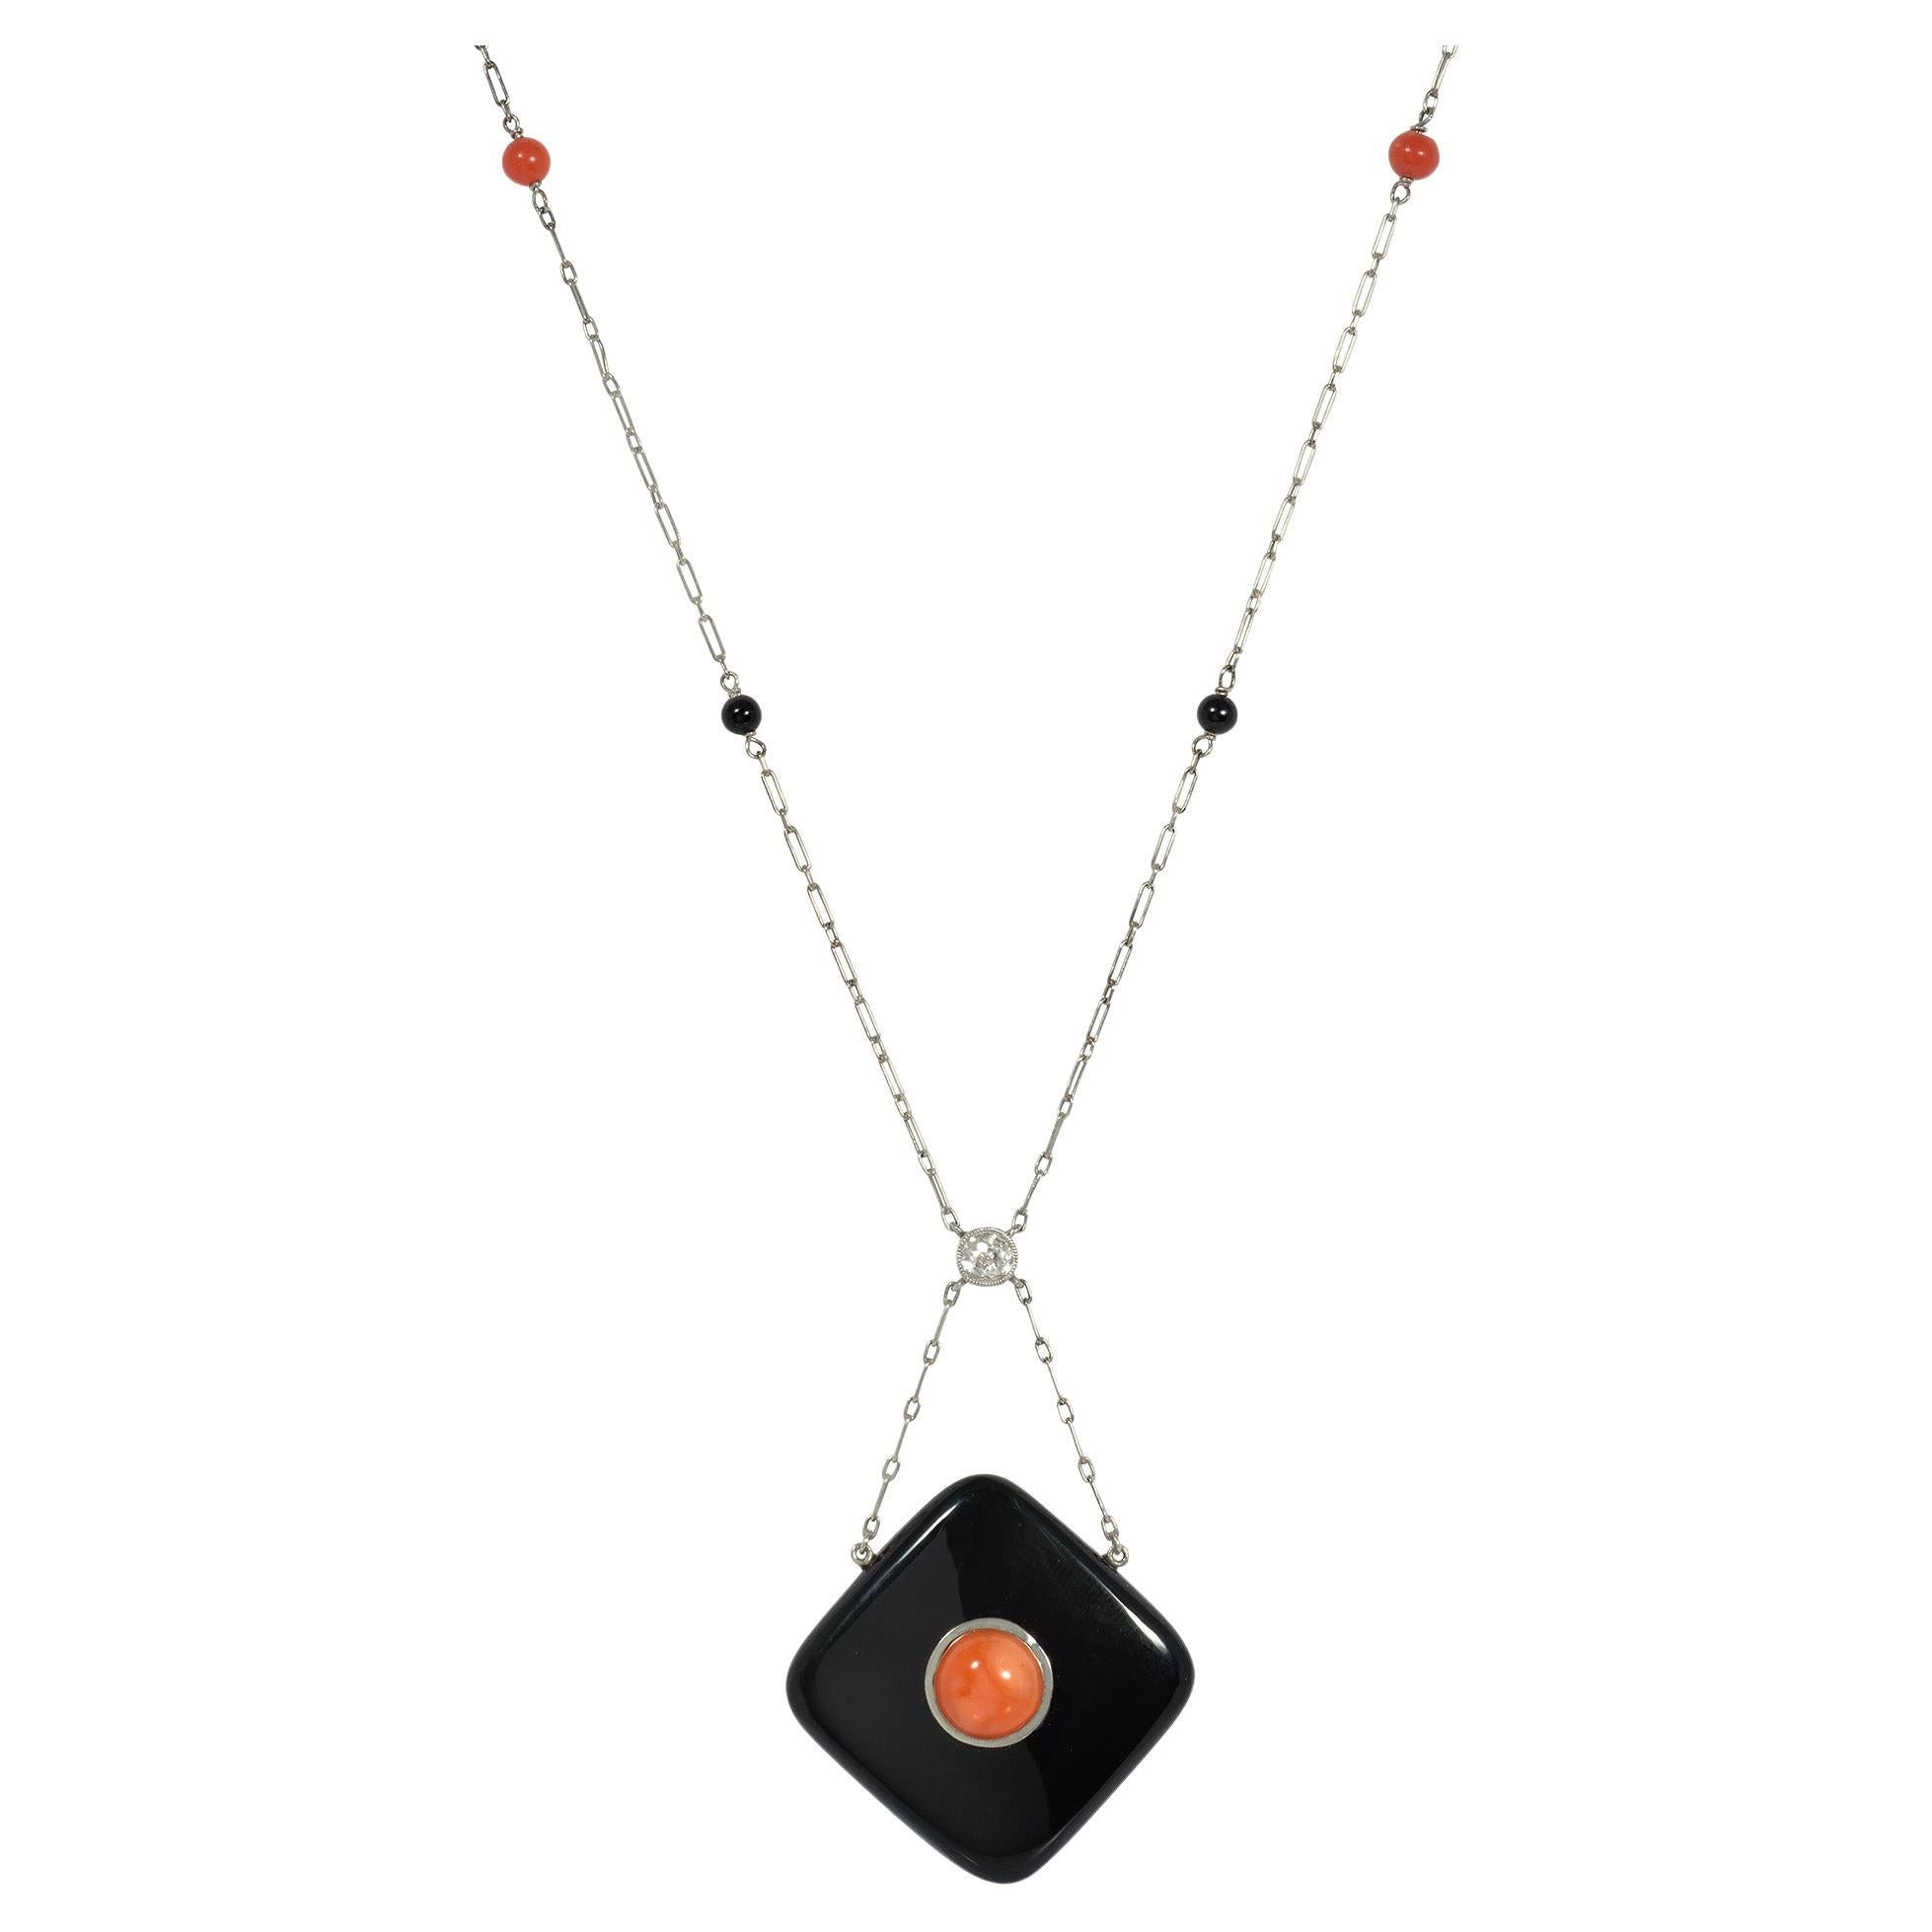 Art Deco Onyx and Coral Necklace with Diamond Accent in Platinum and Gold